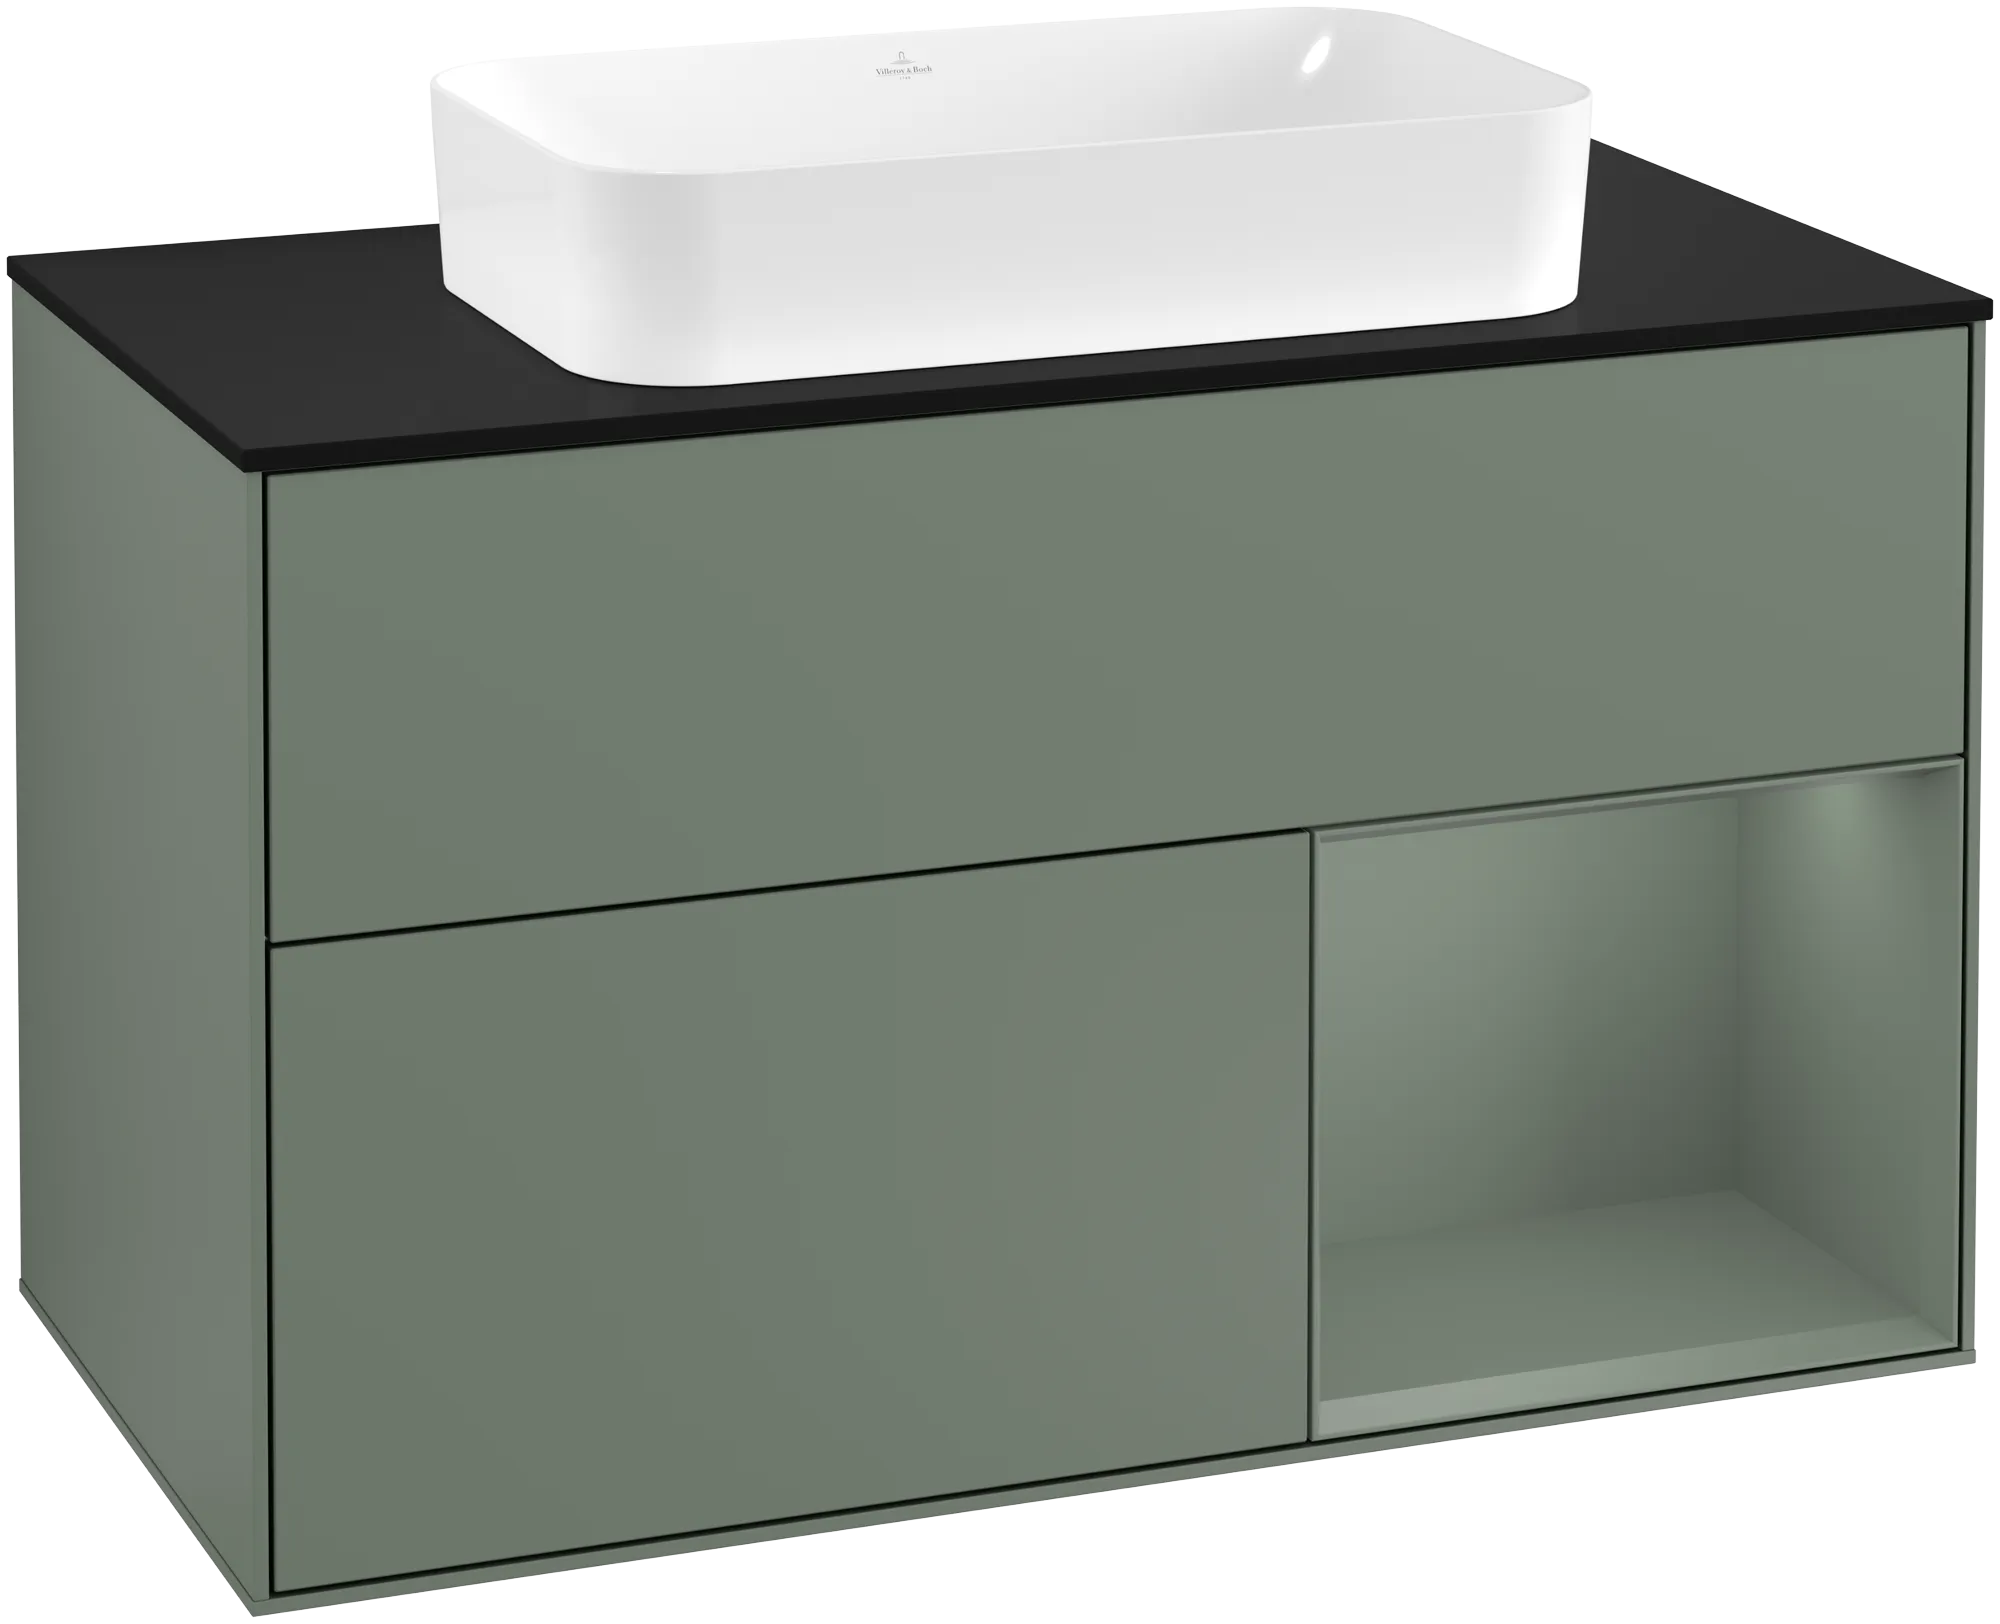 Picture of VILLEROY BOCH Finion Vanity unit, with lighting, 2 pull-out compartments, 1000 x 603 x 501 mm, Olive Matt Lacquer / Olive Matt Lacquer / Glass Black Matt #G252GMGM